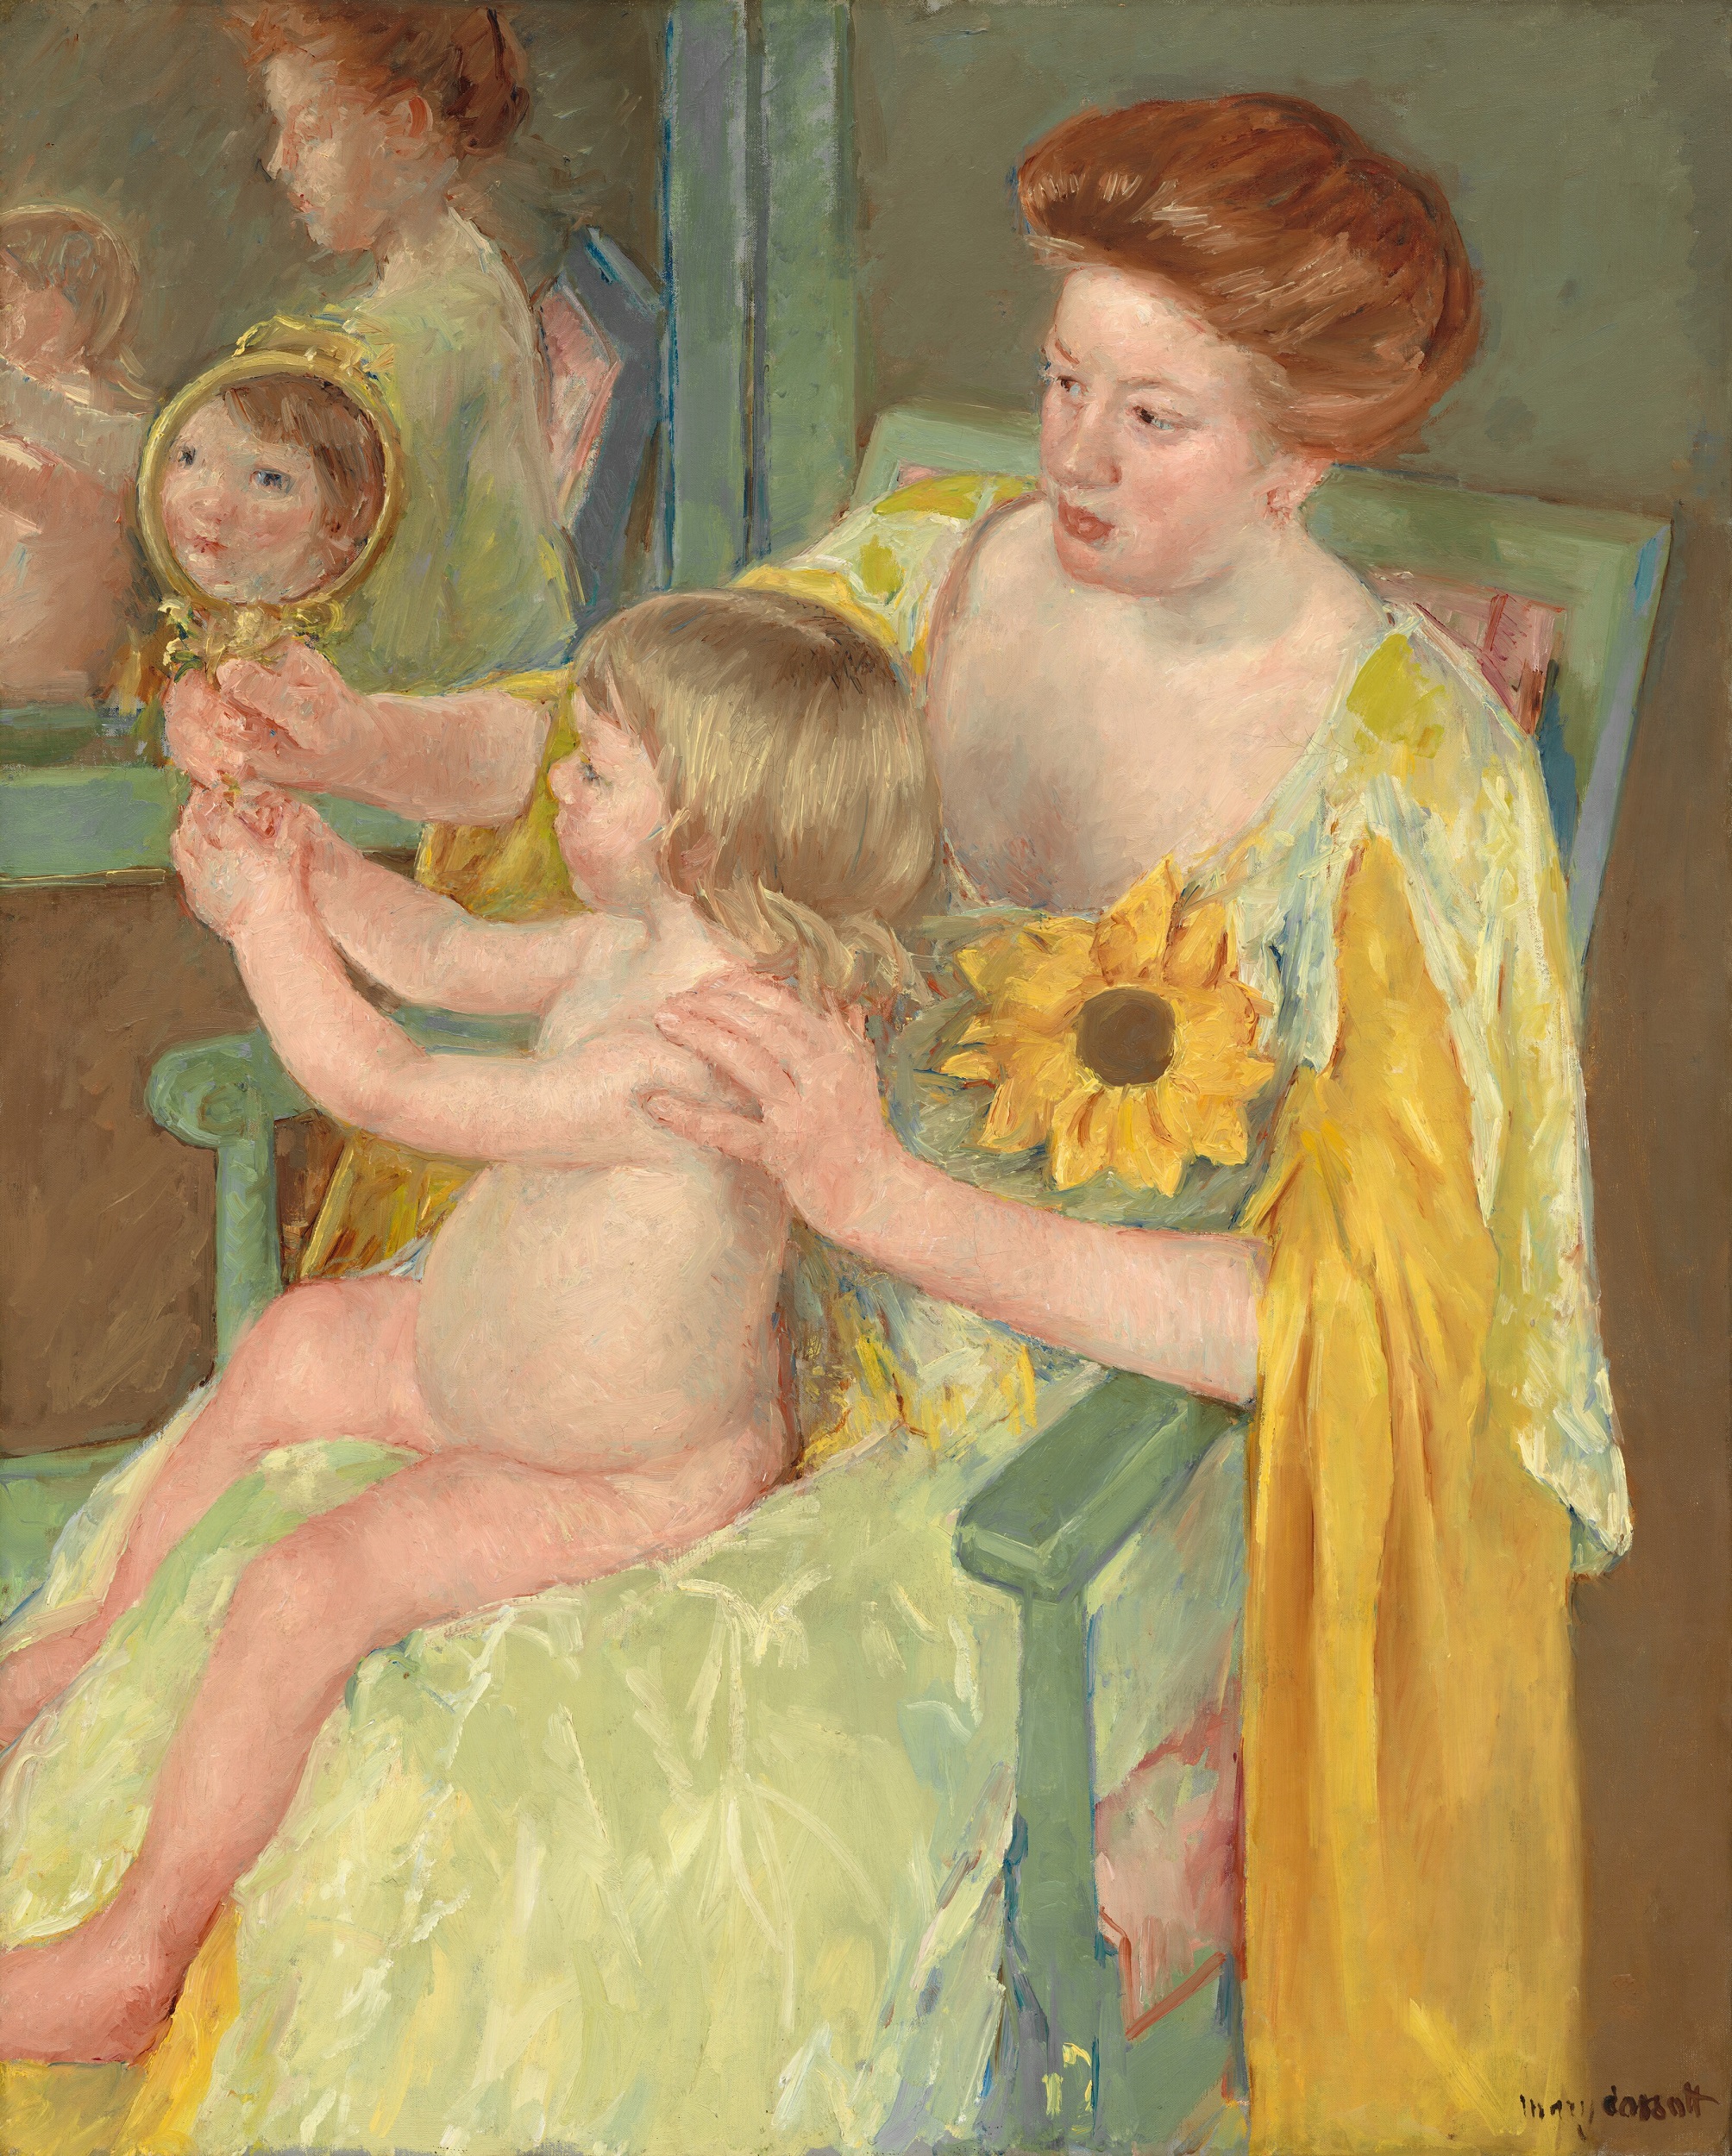 A nude child sits on the lap of a woman with red hair, who wears a green and yellow nightgown with a large sunflower at her breast. The woman and child's reflections are visible in two mirrors, one on the wall and one held by the child.